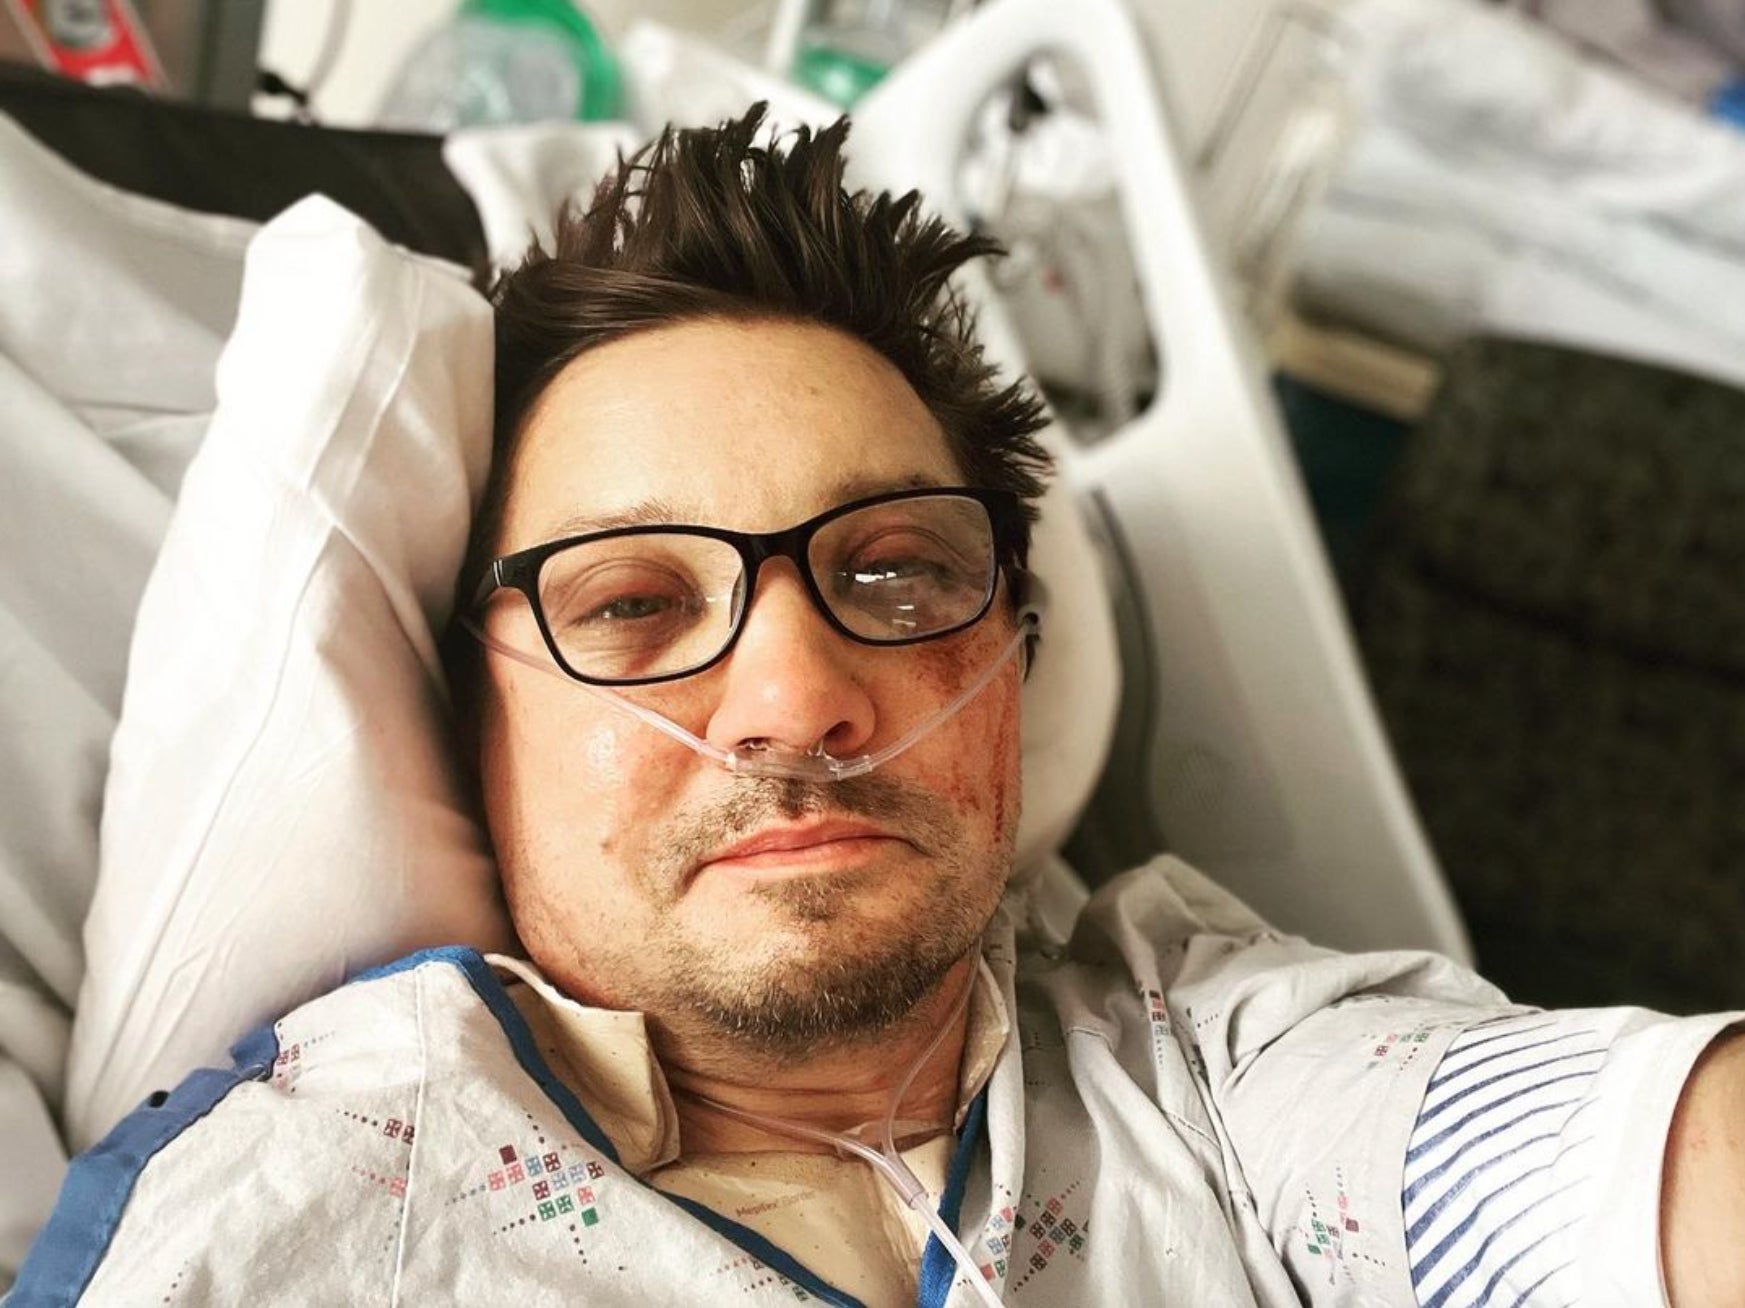 Jeremy Renner’s first social media post since his accident